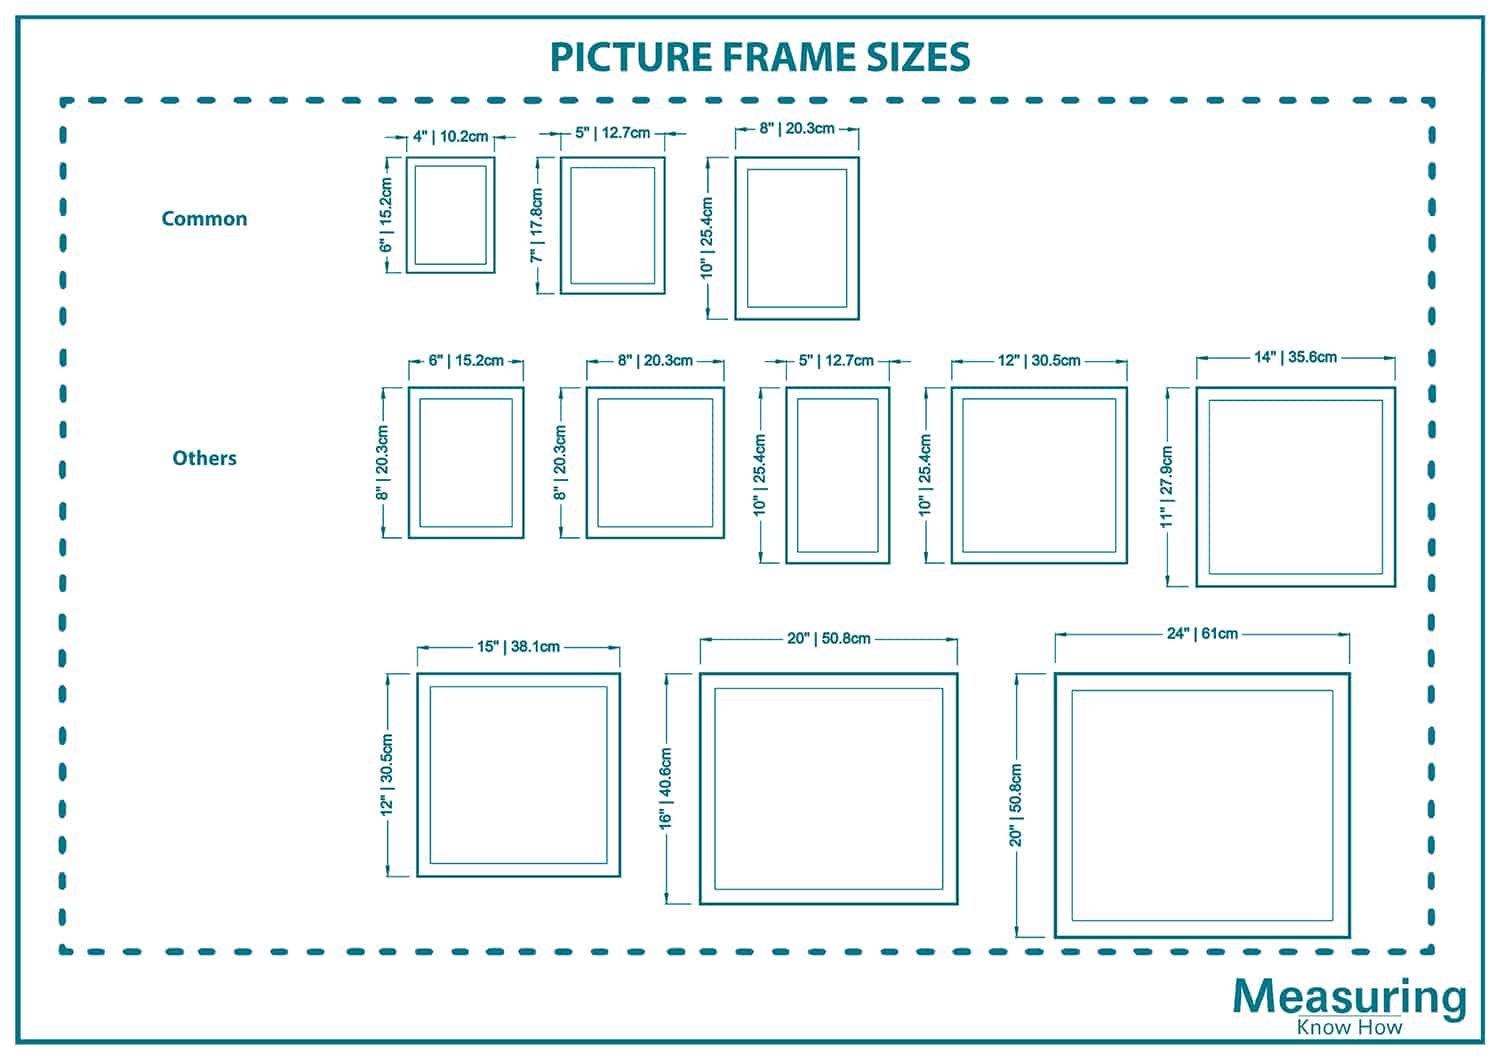 Picture frame sizes